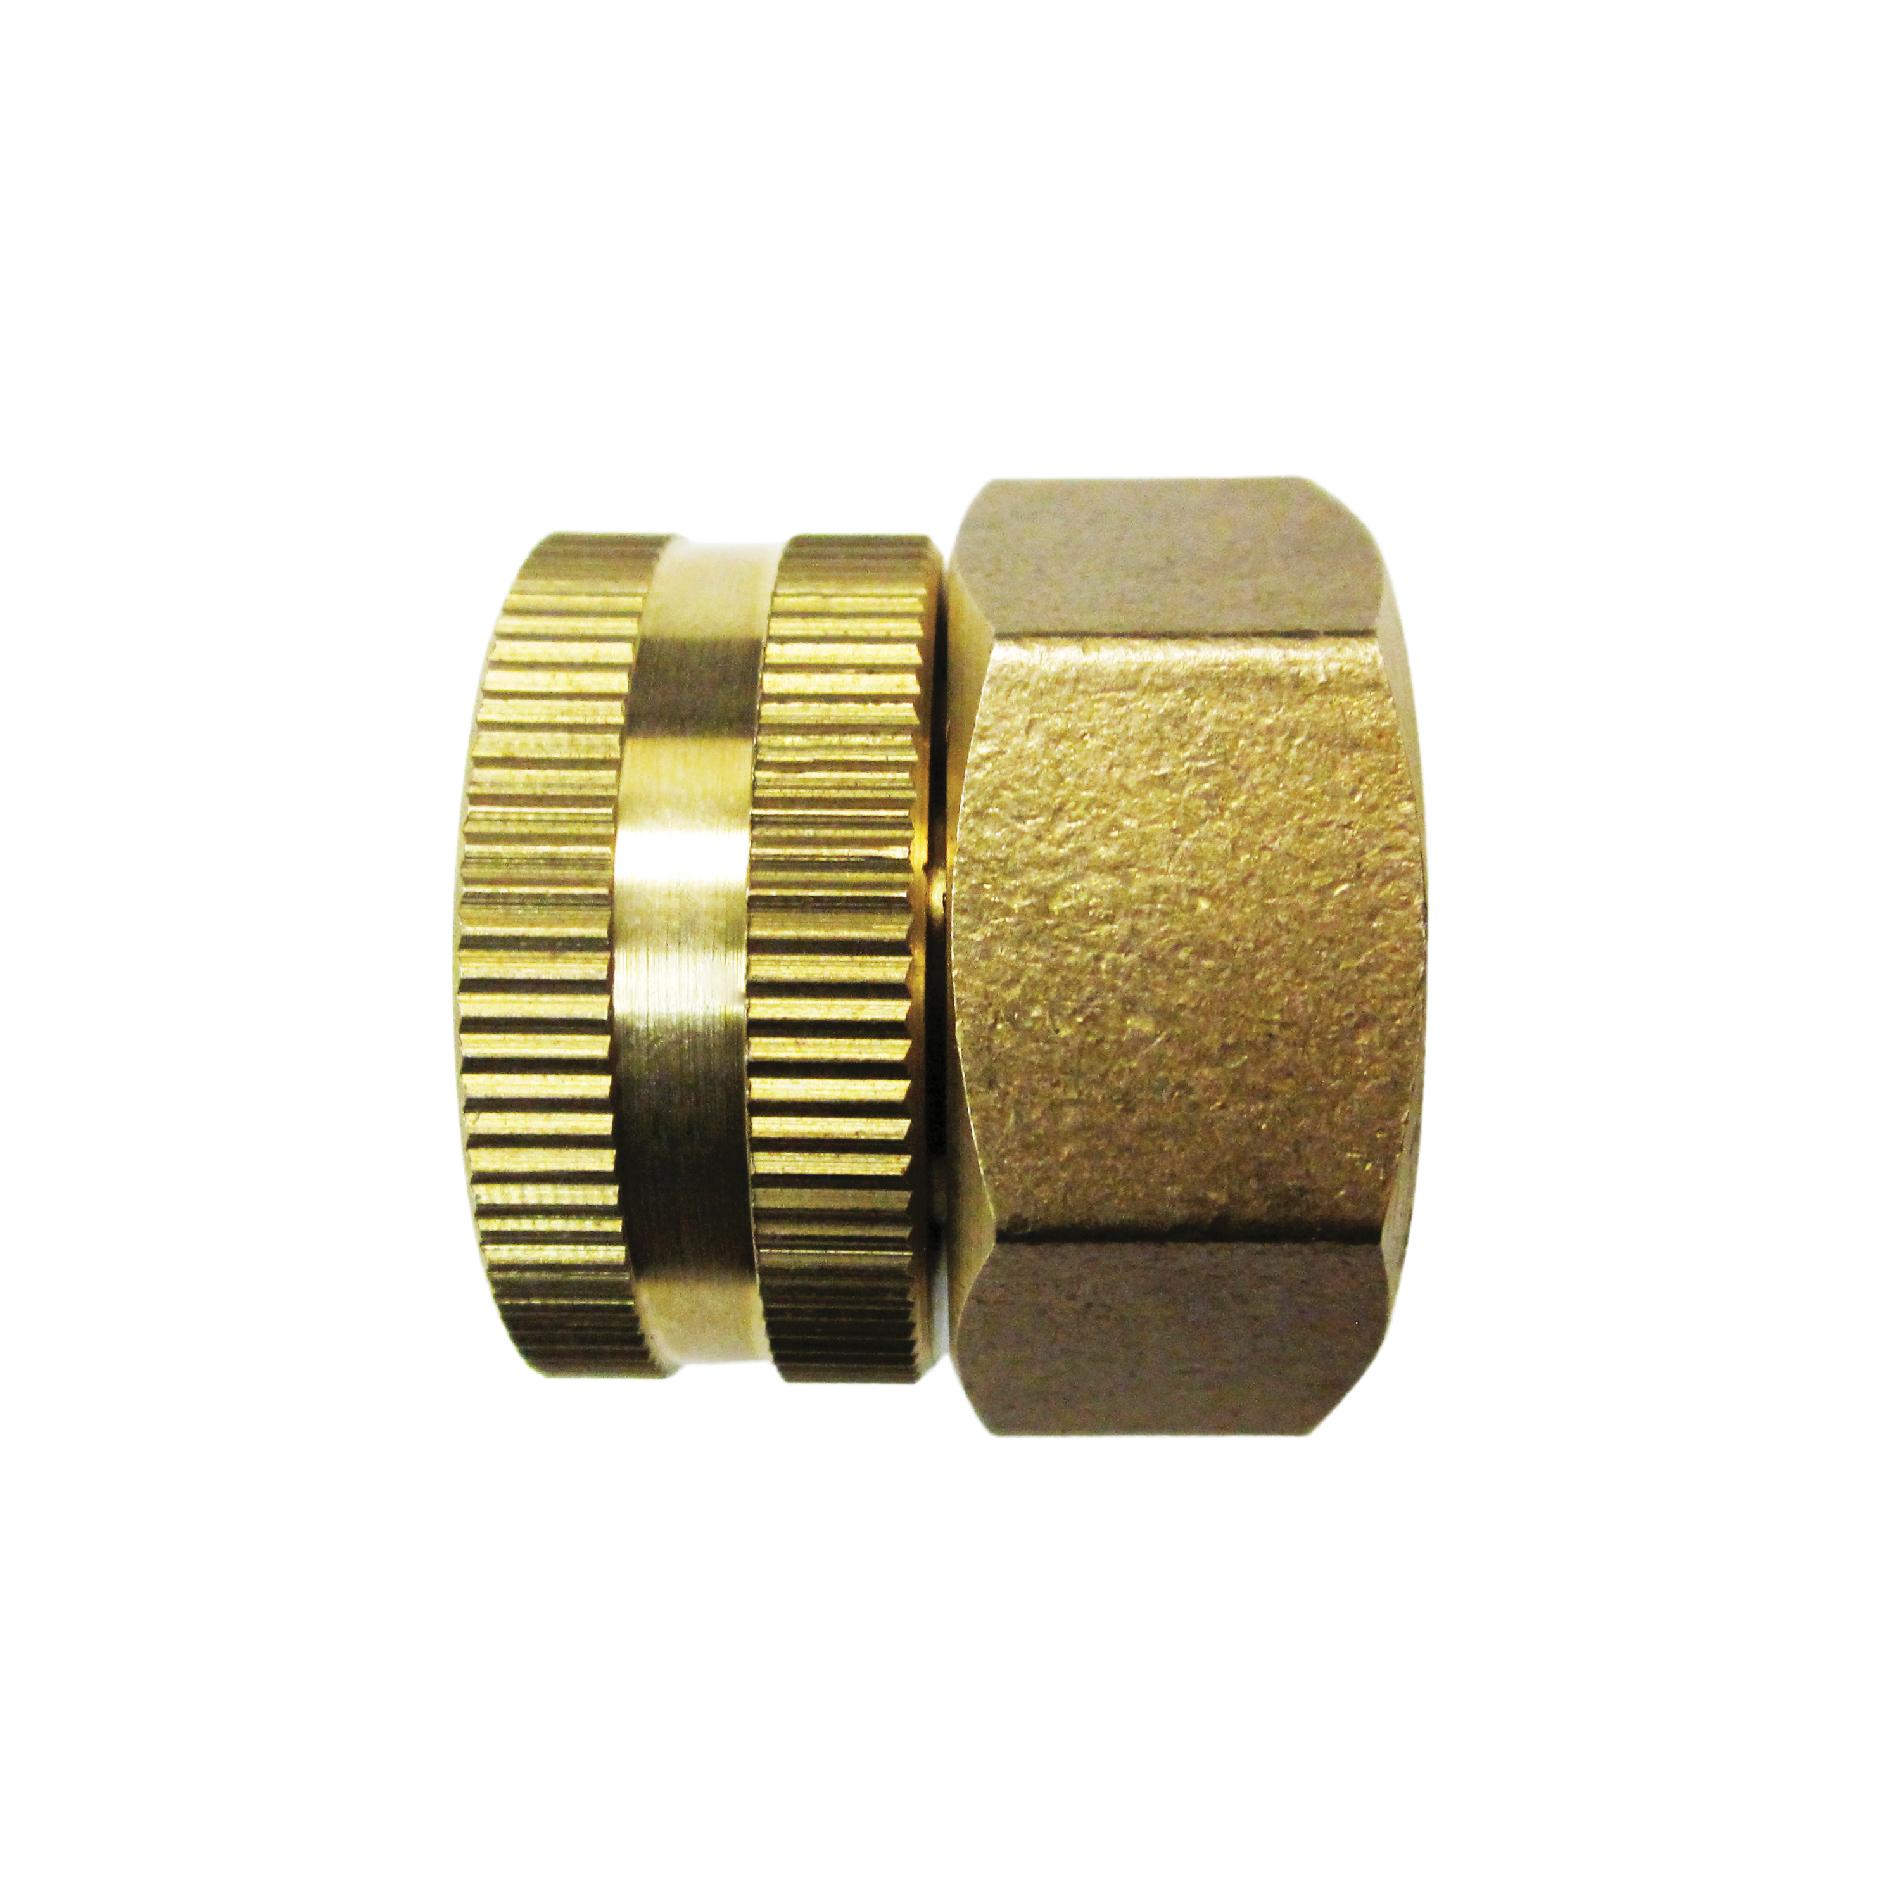 Sun Joe SPX-BSC Dual Swivel Brass Connector 3/4-In. by 3/4-In. Garden Hose to Pipe End (fits SPX Pressure Washer Series) -